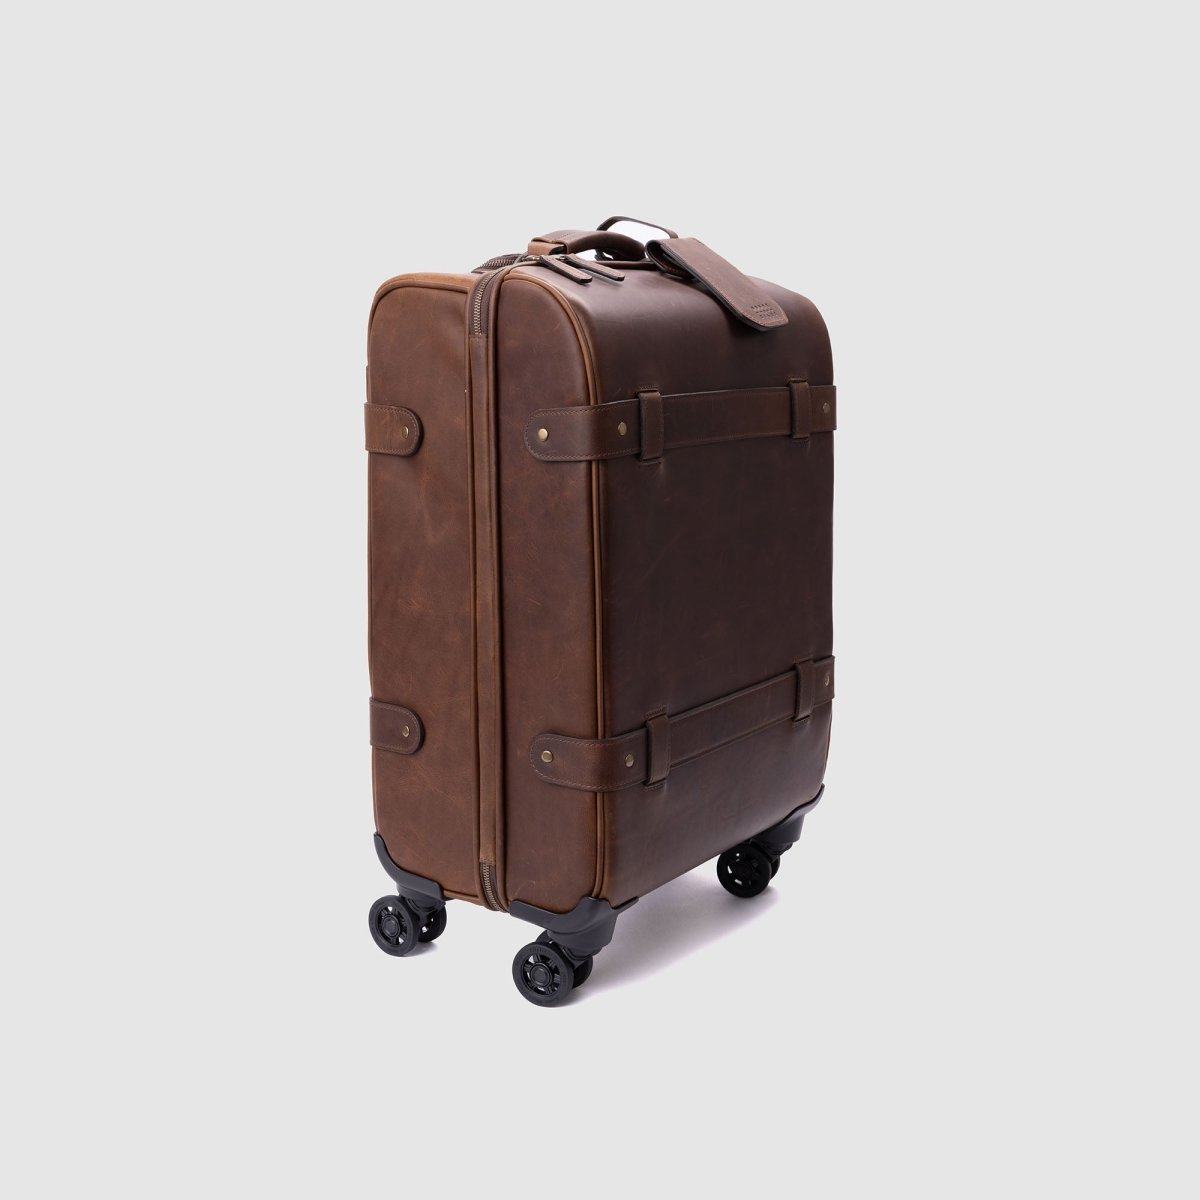 Parker Carry-On Suitcase